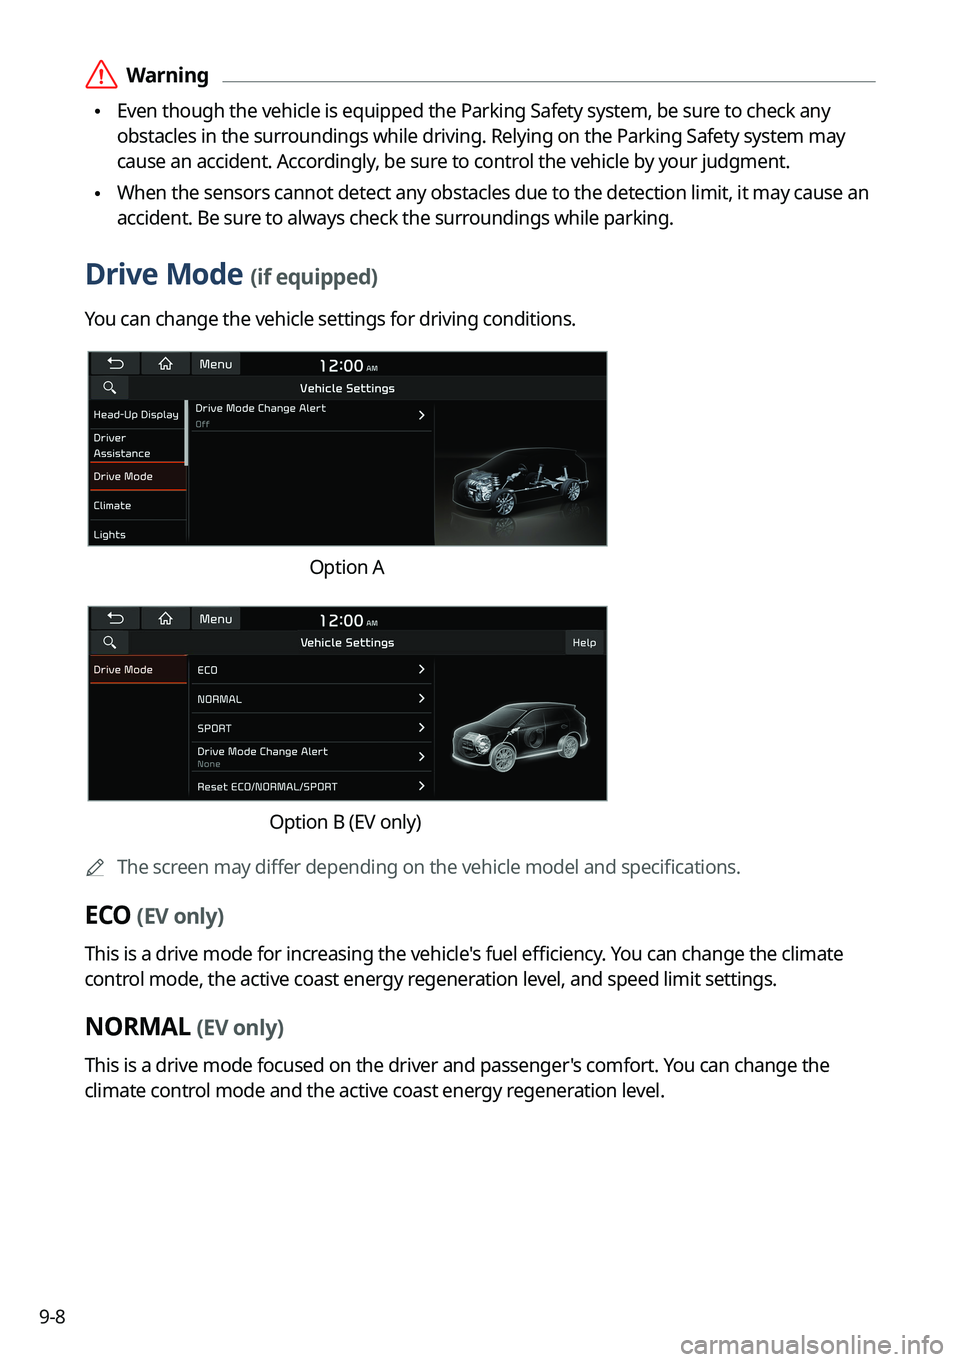 KIA SORENTO HYBRID 2022  Navigation System Quick Reference Guide 9-8
 \335Warning
 \225Even though the vehicle is equipped the Parking Safety system, be sure to check any 
obstacles in the surroundings while driving. Relying on the Parking Safety system may 
cause 